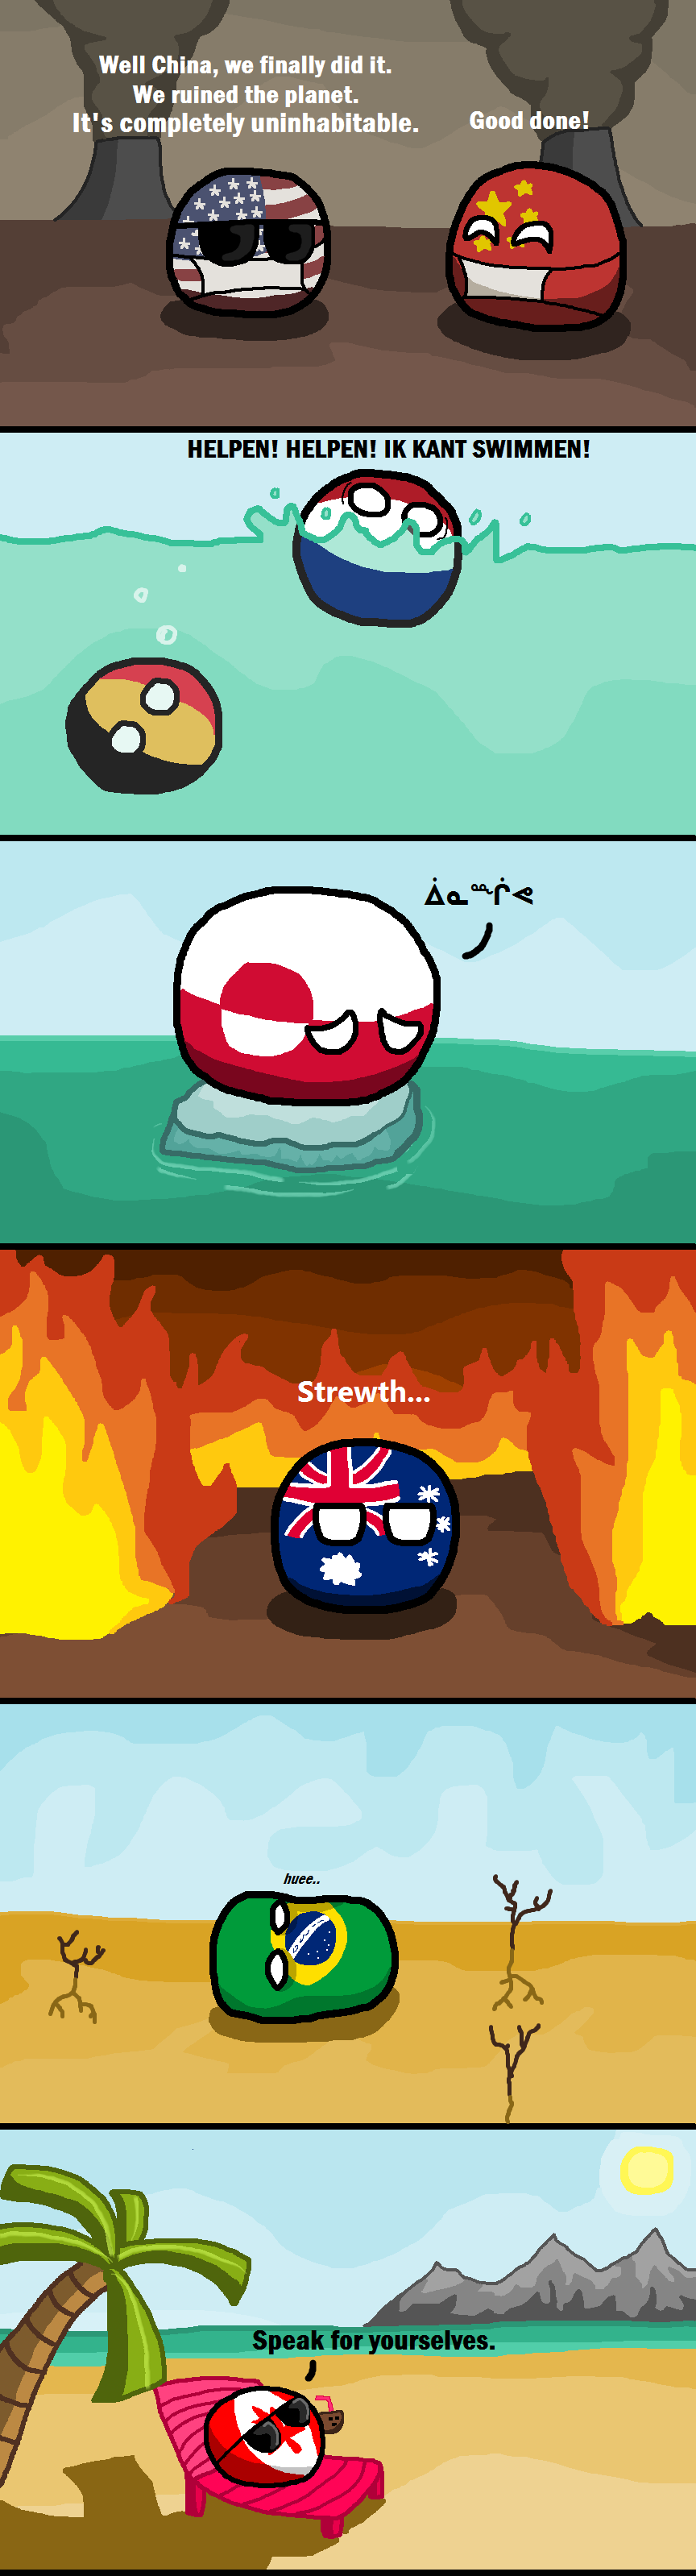 Global Warming. r/polandball (AaronC14) reddit.com/r/polandball/comments/1z0cua/notsobad/. Well china, we finally did " We mined the MTM It' s completely uninha